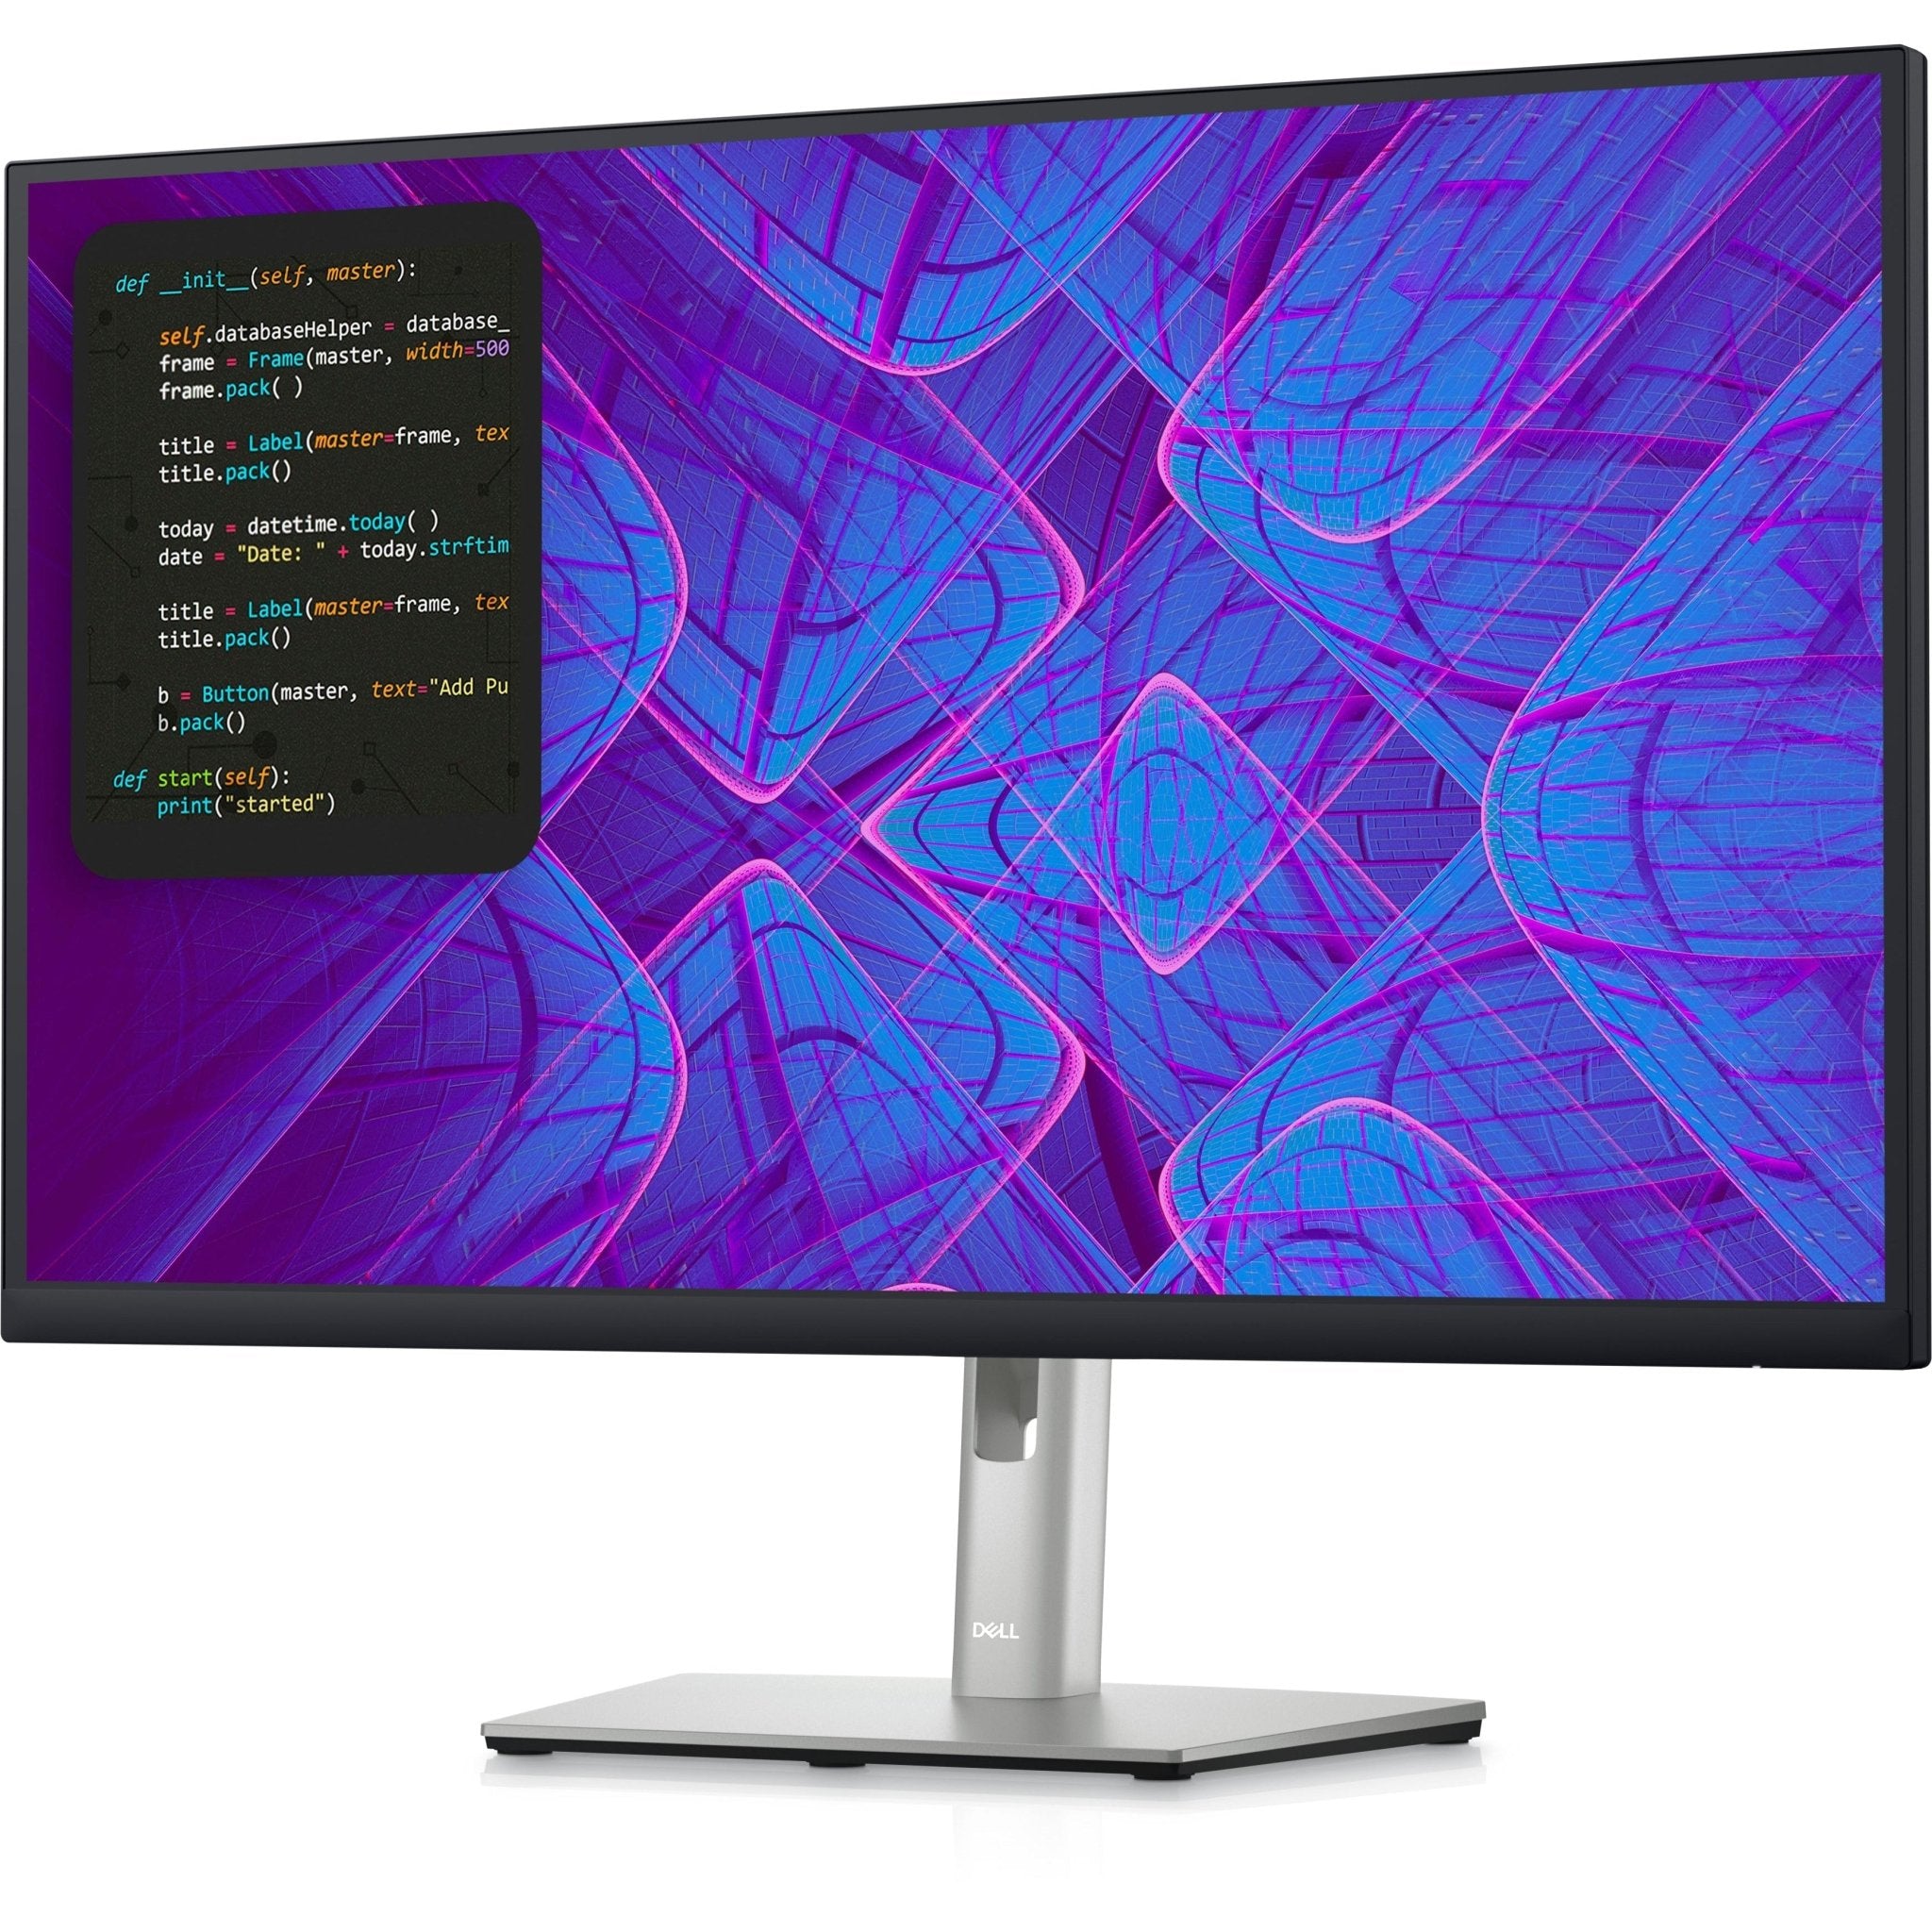 Dell P2723QE Monitor Review: Unveiling Performance and Productivity Gains